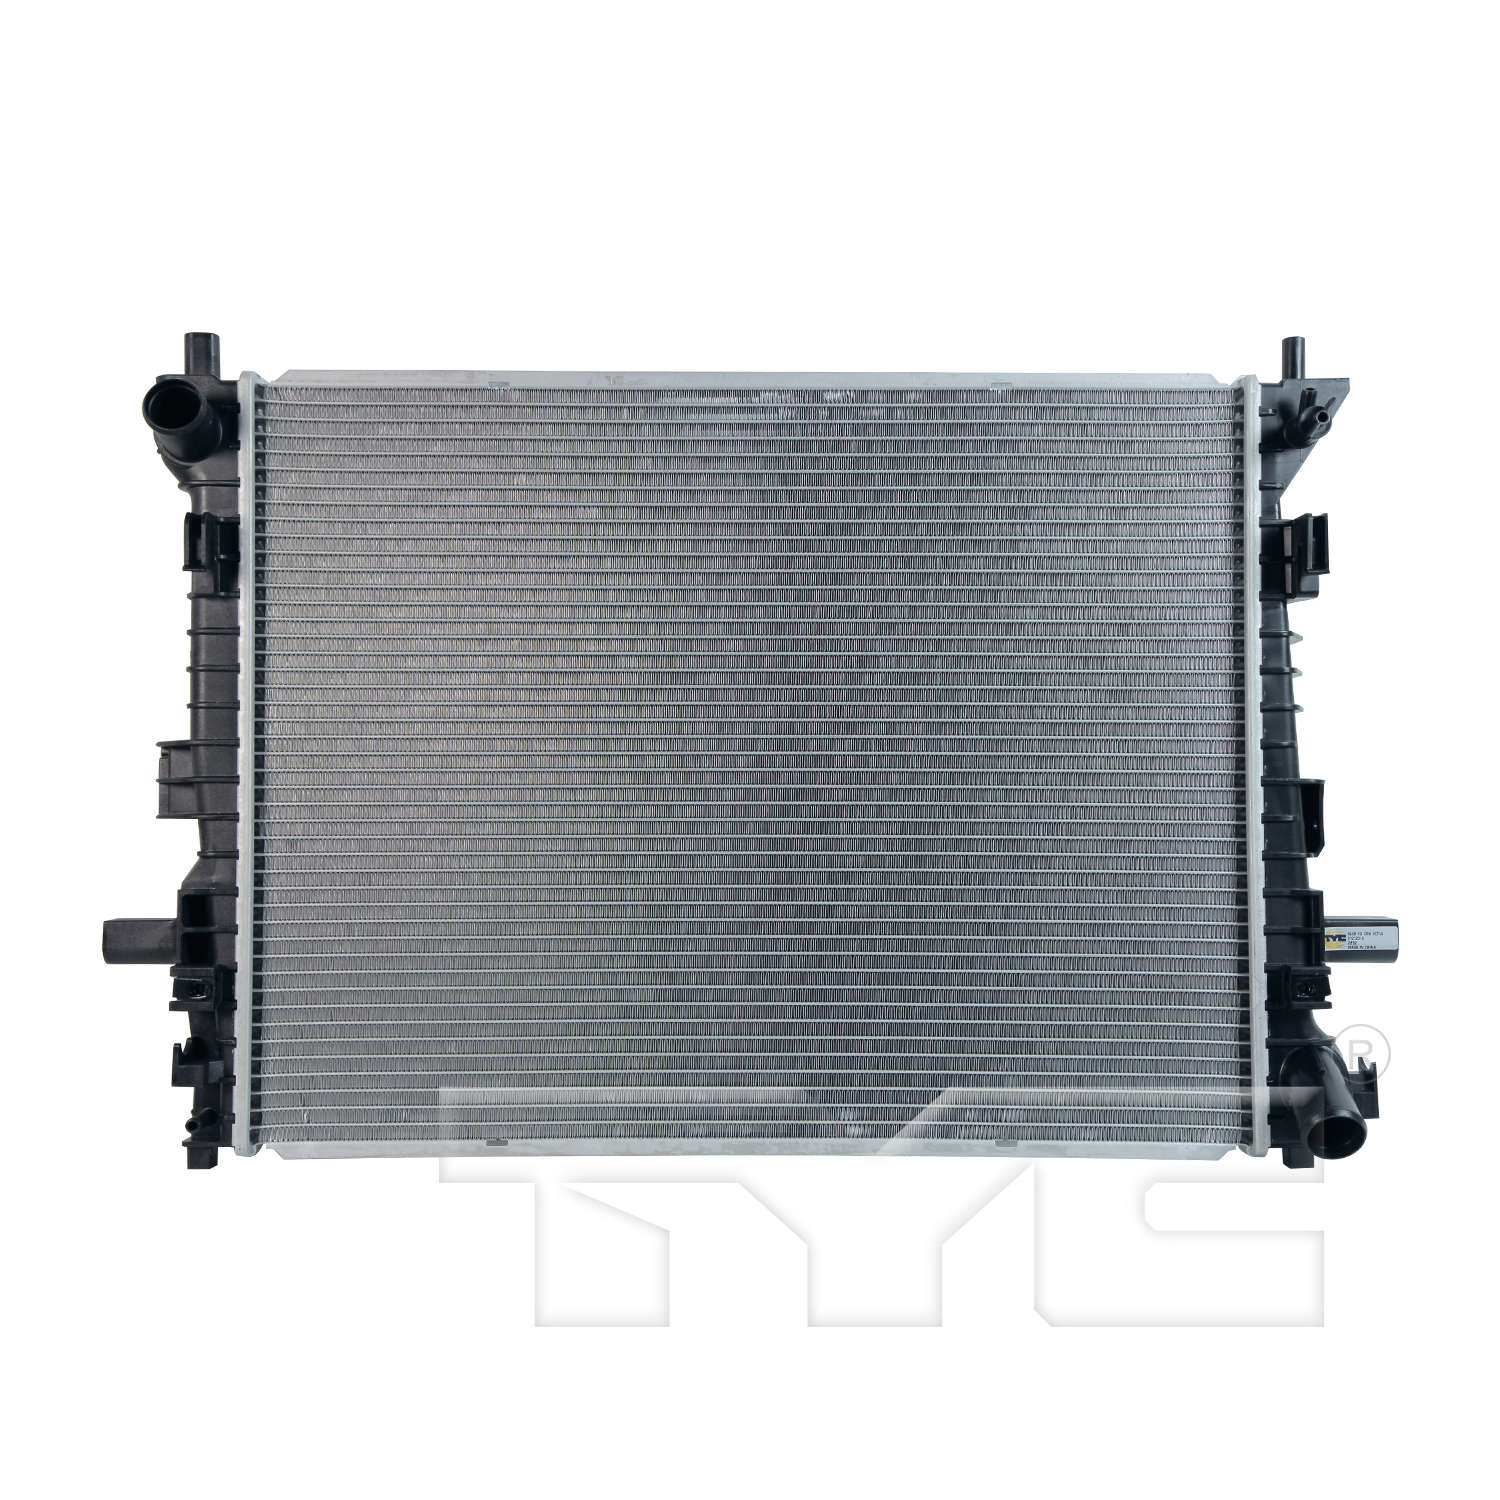 Aftermarket RADIATORS for FORD - CROWN VICTORIA, CROWN VICTORIA,06-11,Radiator assembly